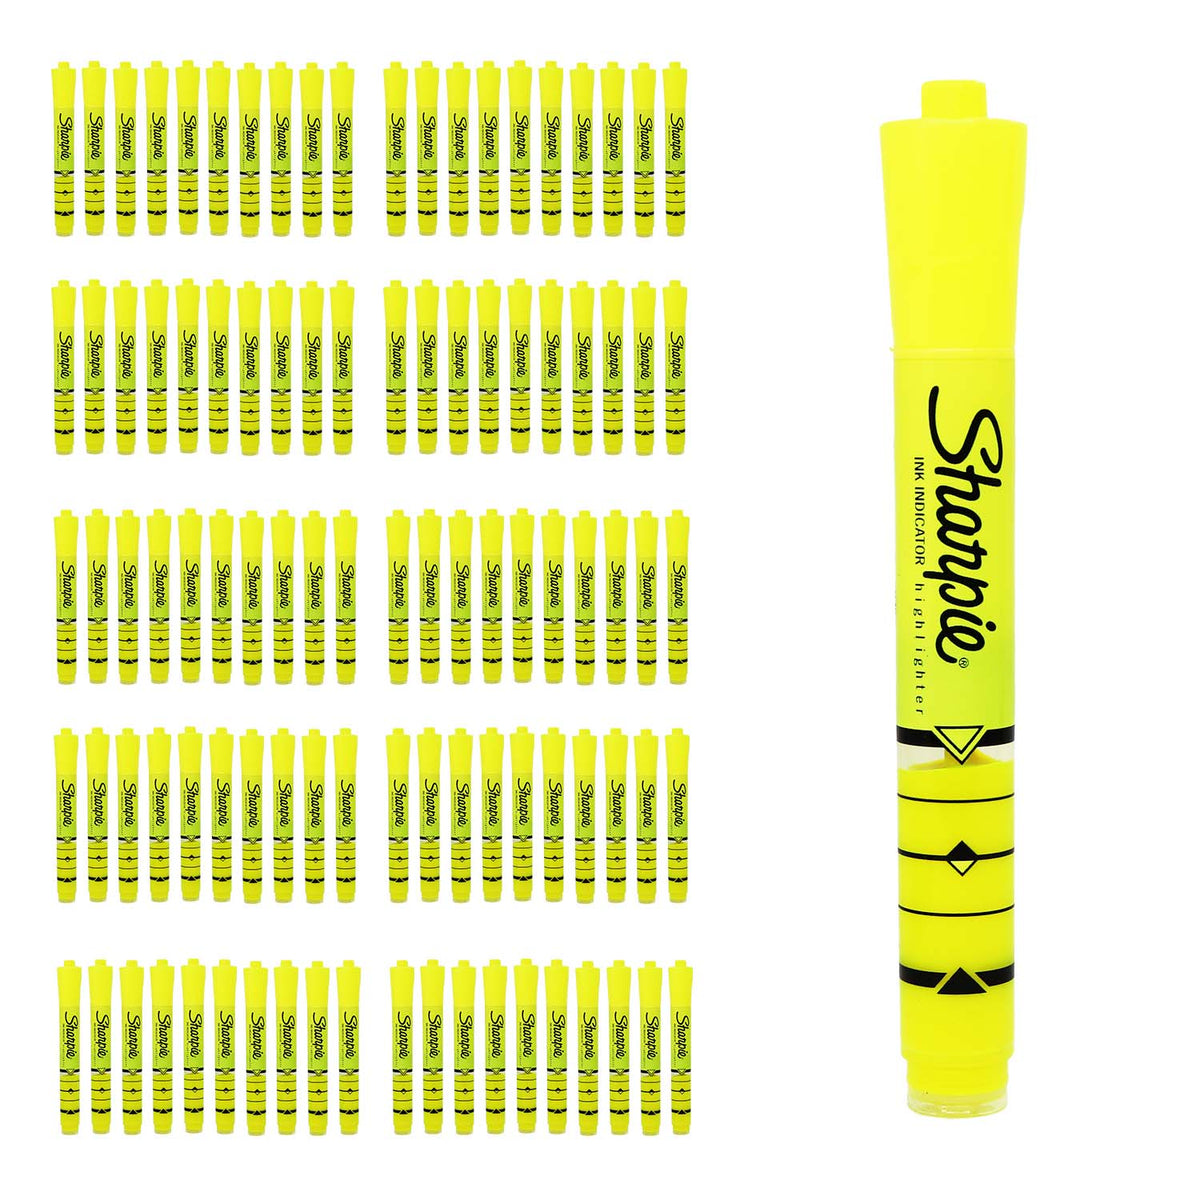 Buy 600 Ink Indicator Highlighters in Yellow - Bulk School Supplies Wholesale Case of 600 -Ink Indicator Highlighters